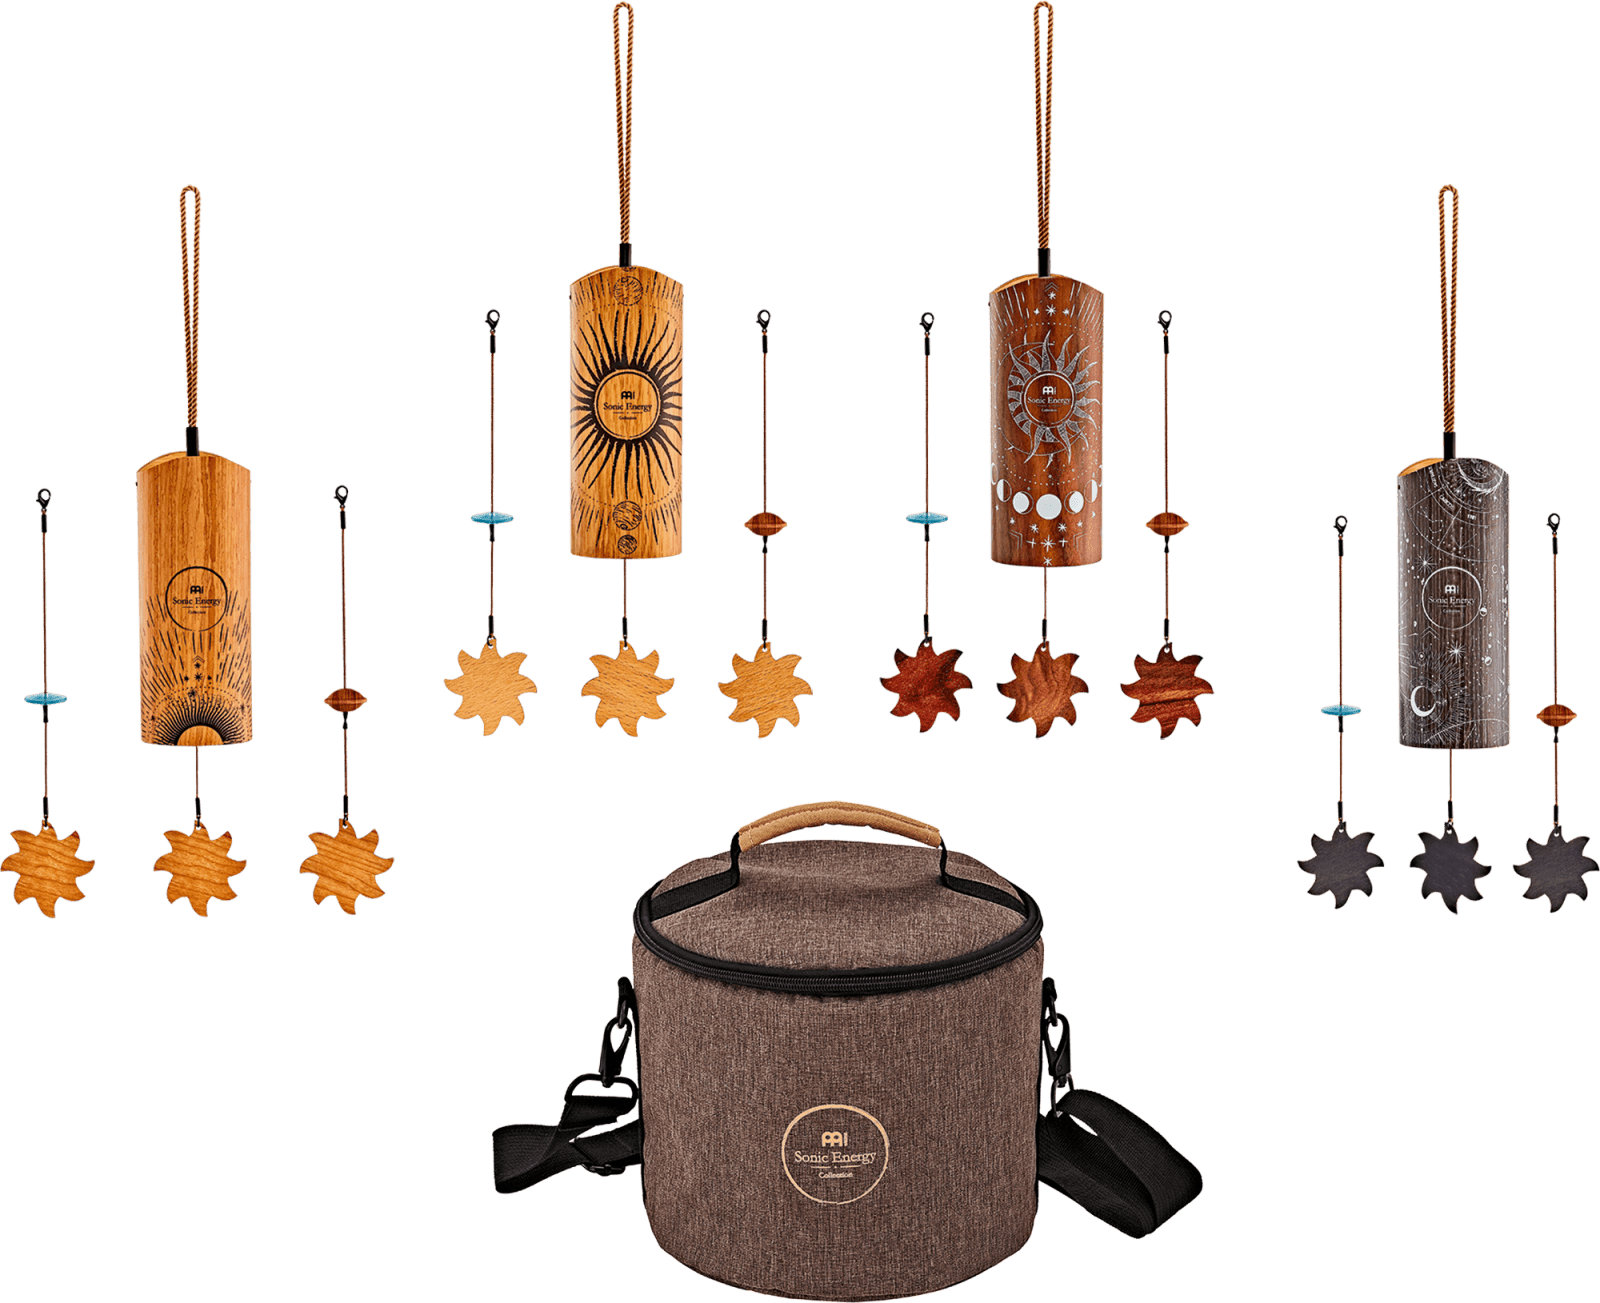 Sonic Energy Cosmic Bamboo Chime Set 4 pcs with Bag - Cosmic Bamboo Chime